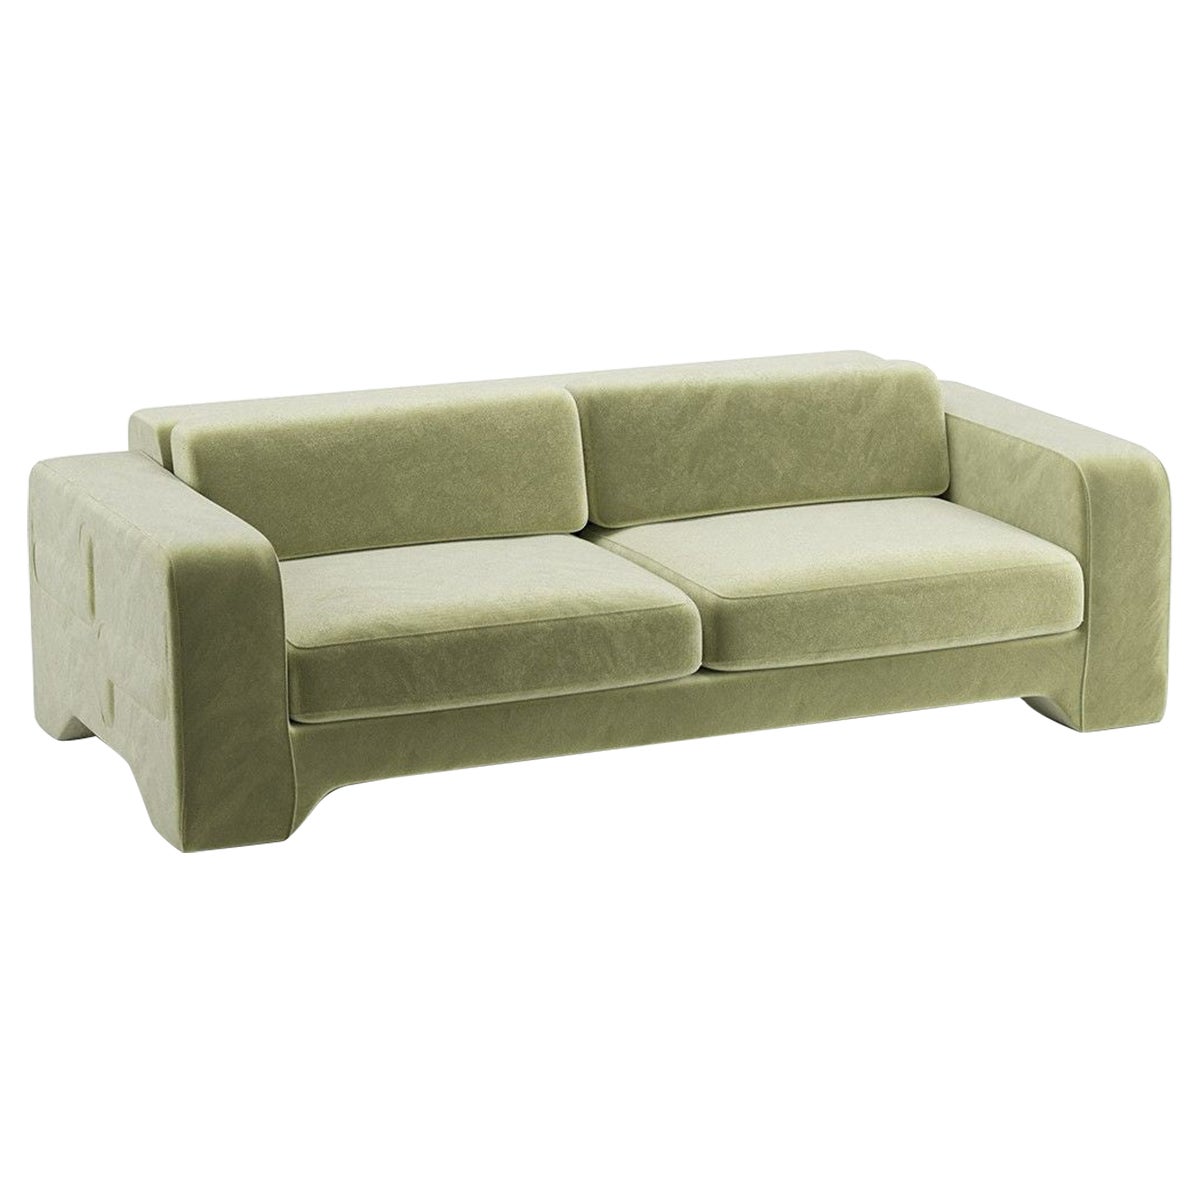 Popus Editions Giovanna 3 Seater Sofa in Almond Green Como Velvet Upholstery